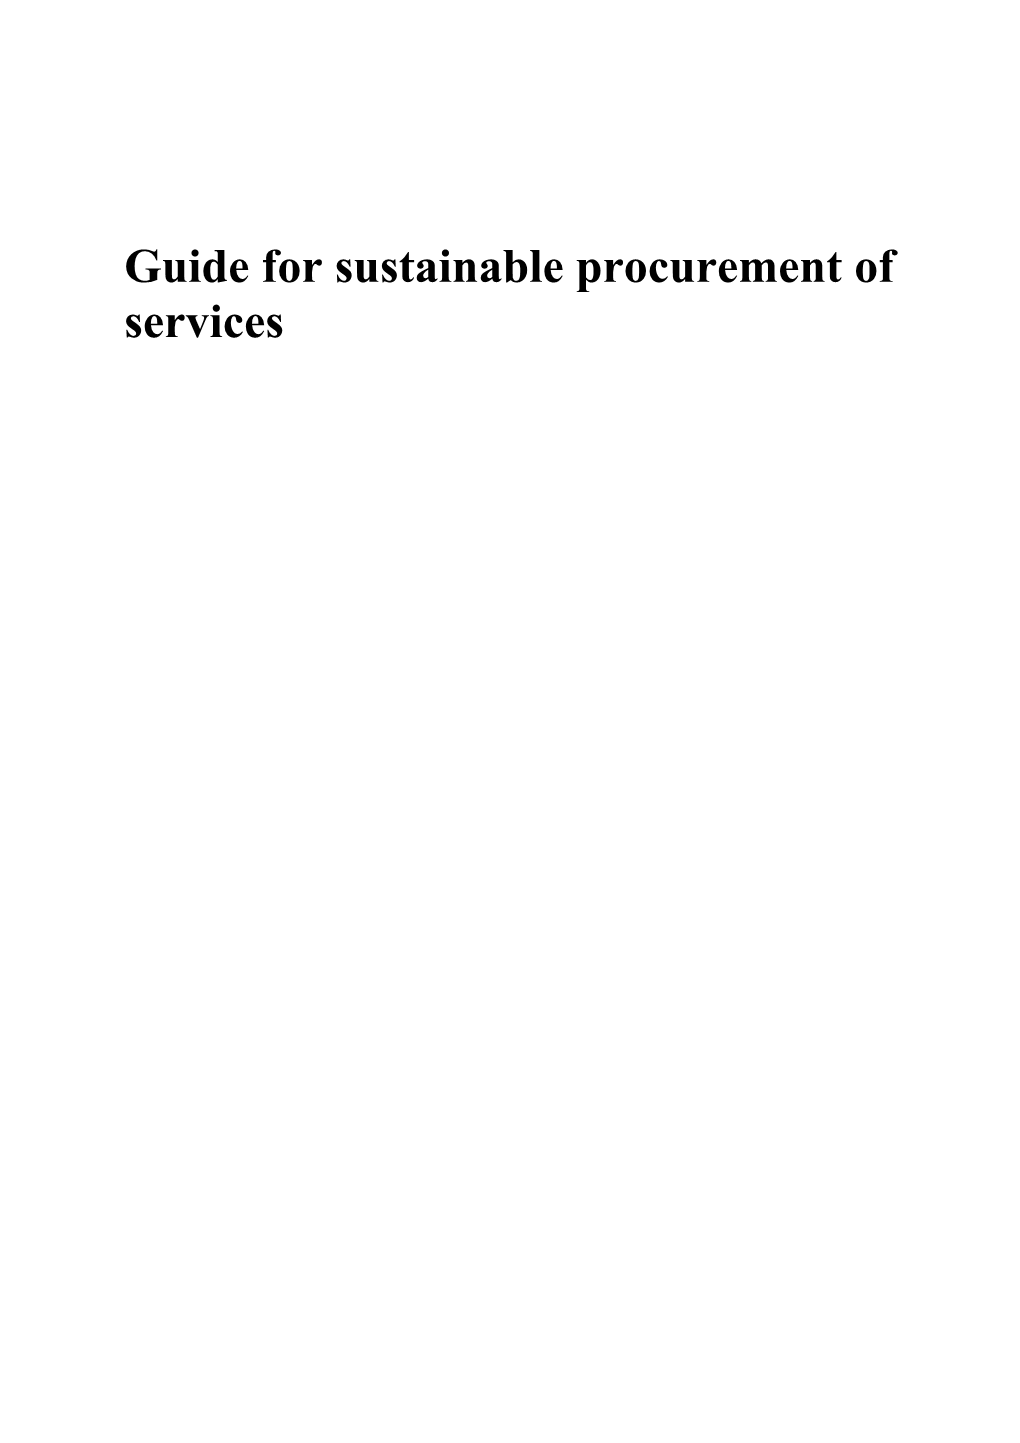 Guide for Sustainable Procurement of Services